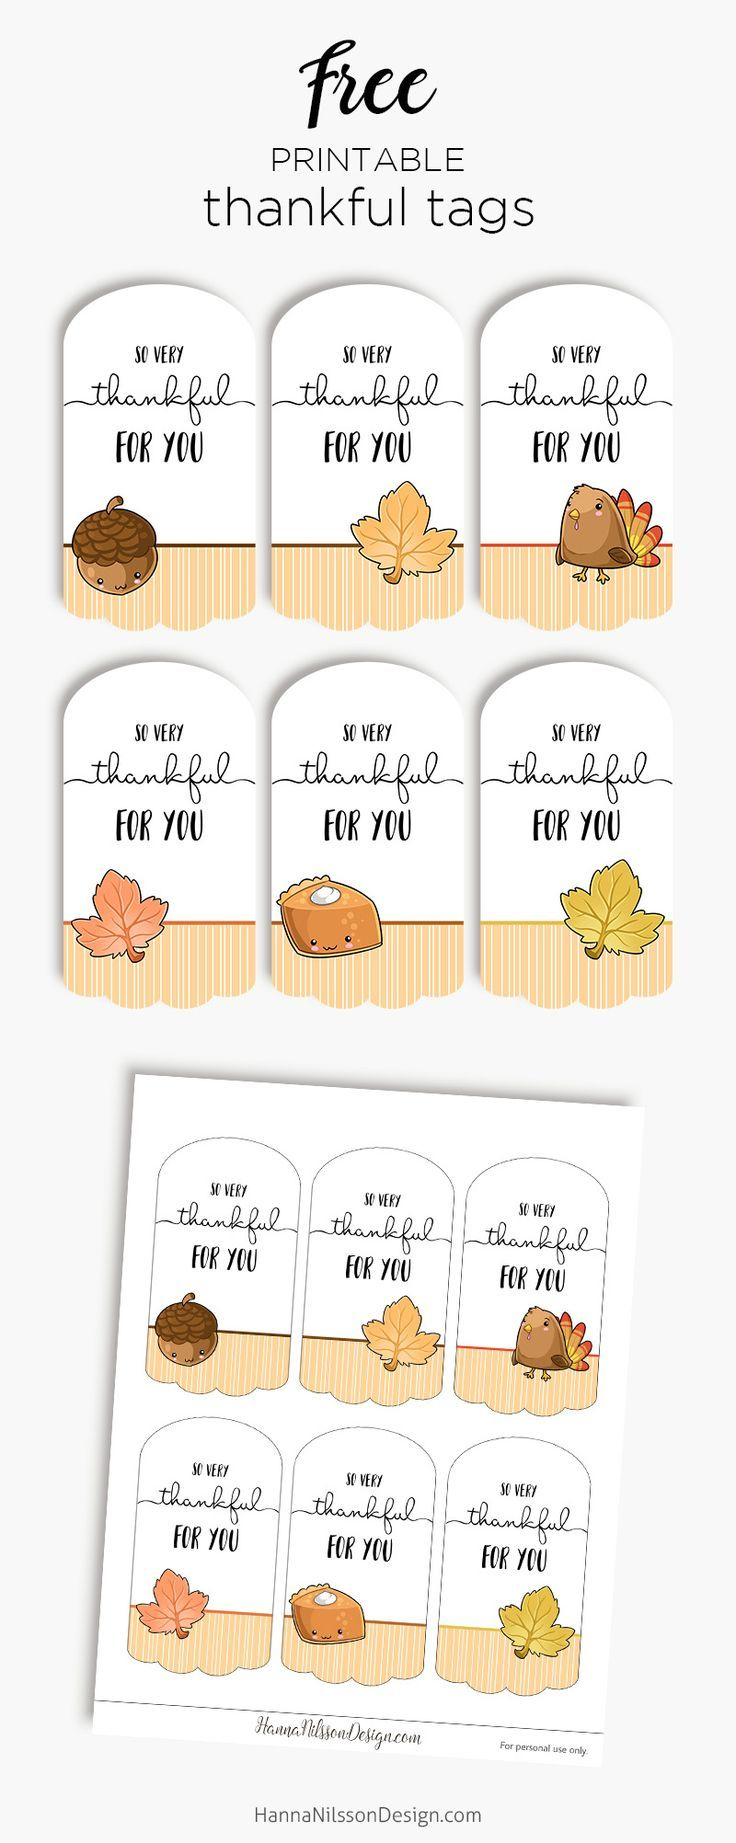 Thankful For You Tags| Free Printable Tags For Thanksgiving Gifts - Thankful For You Free Printable Tags